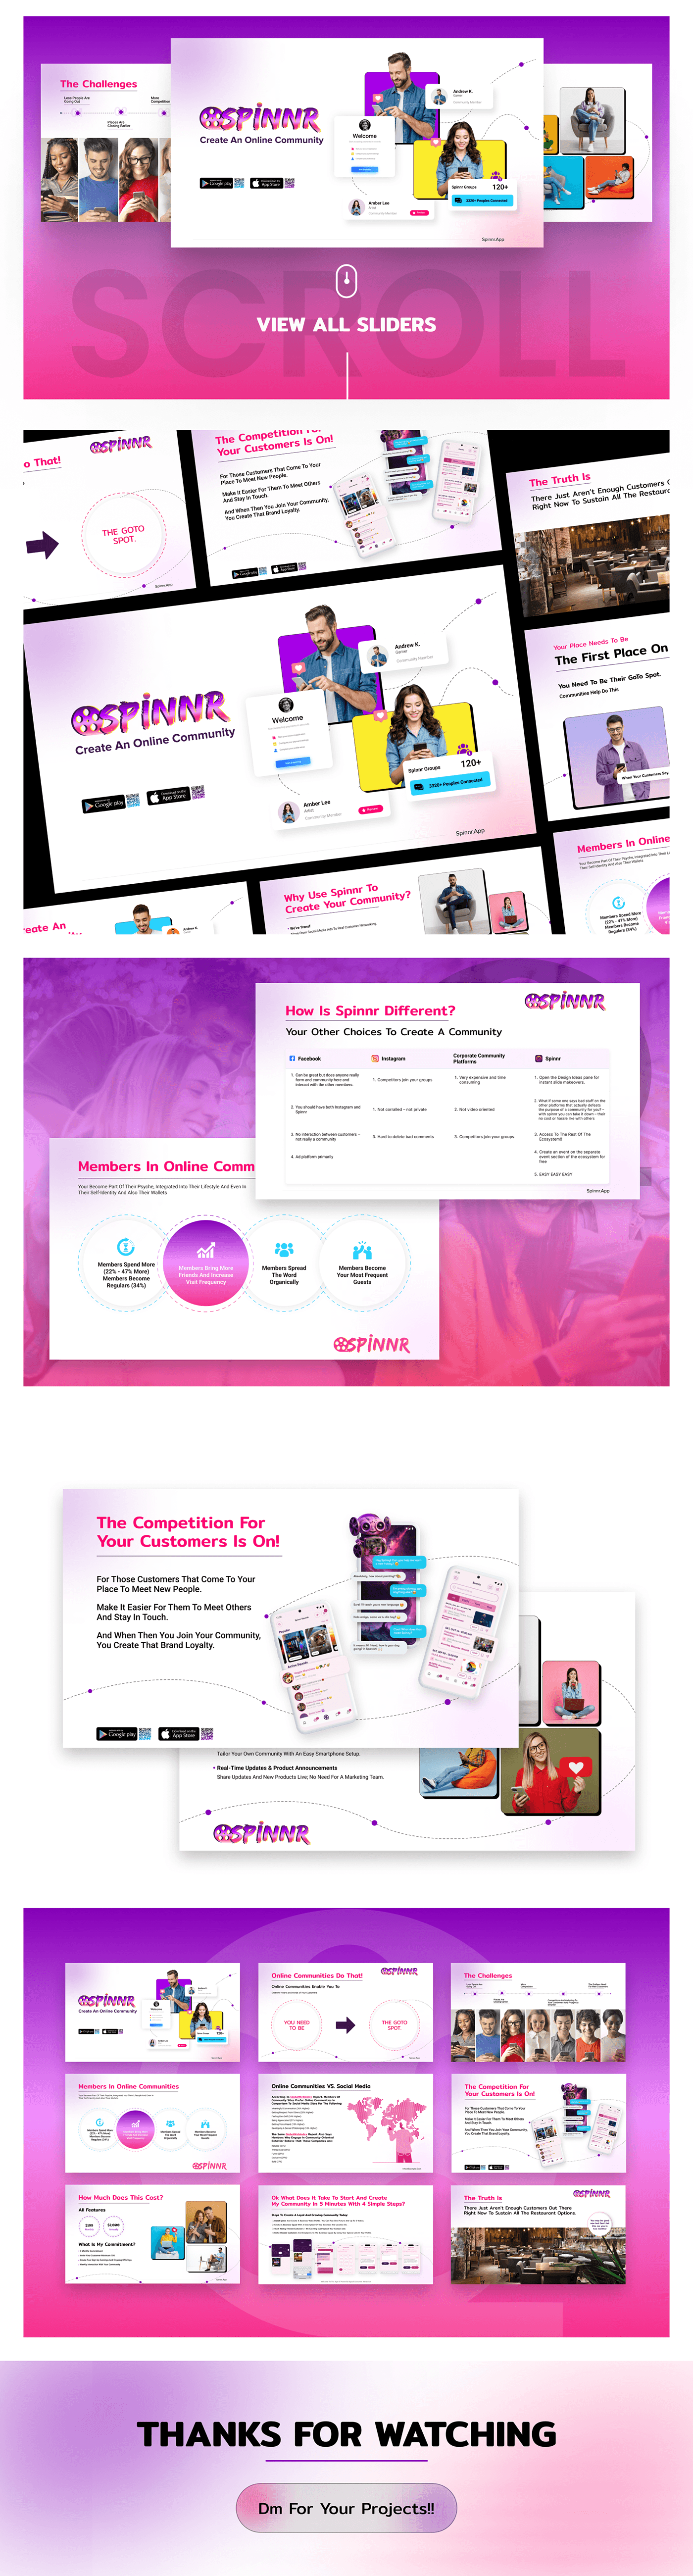 Powerpoint PPT Case Study Figma pitch deck inspiration